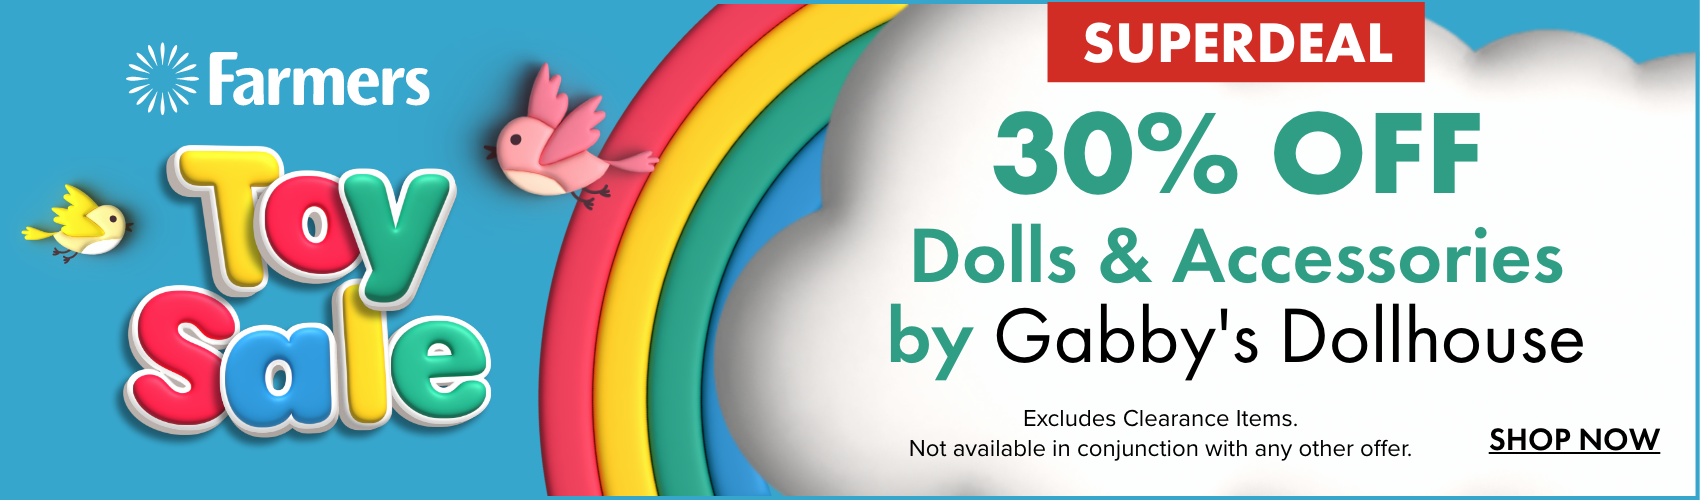 30% OFF Dolls & Accessories by Gabby's Dollhouse